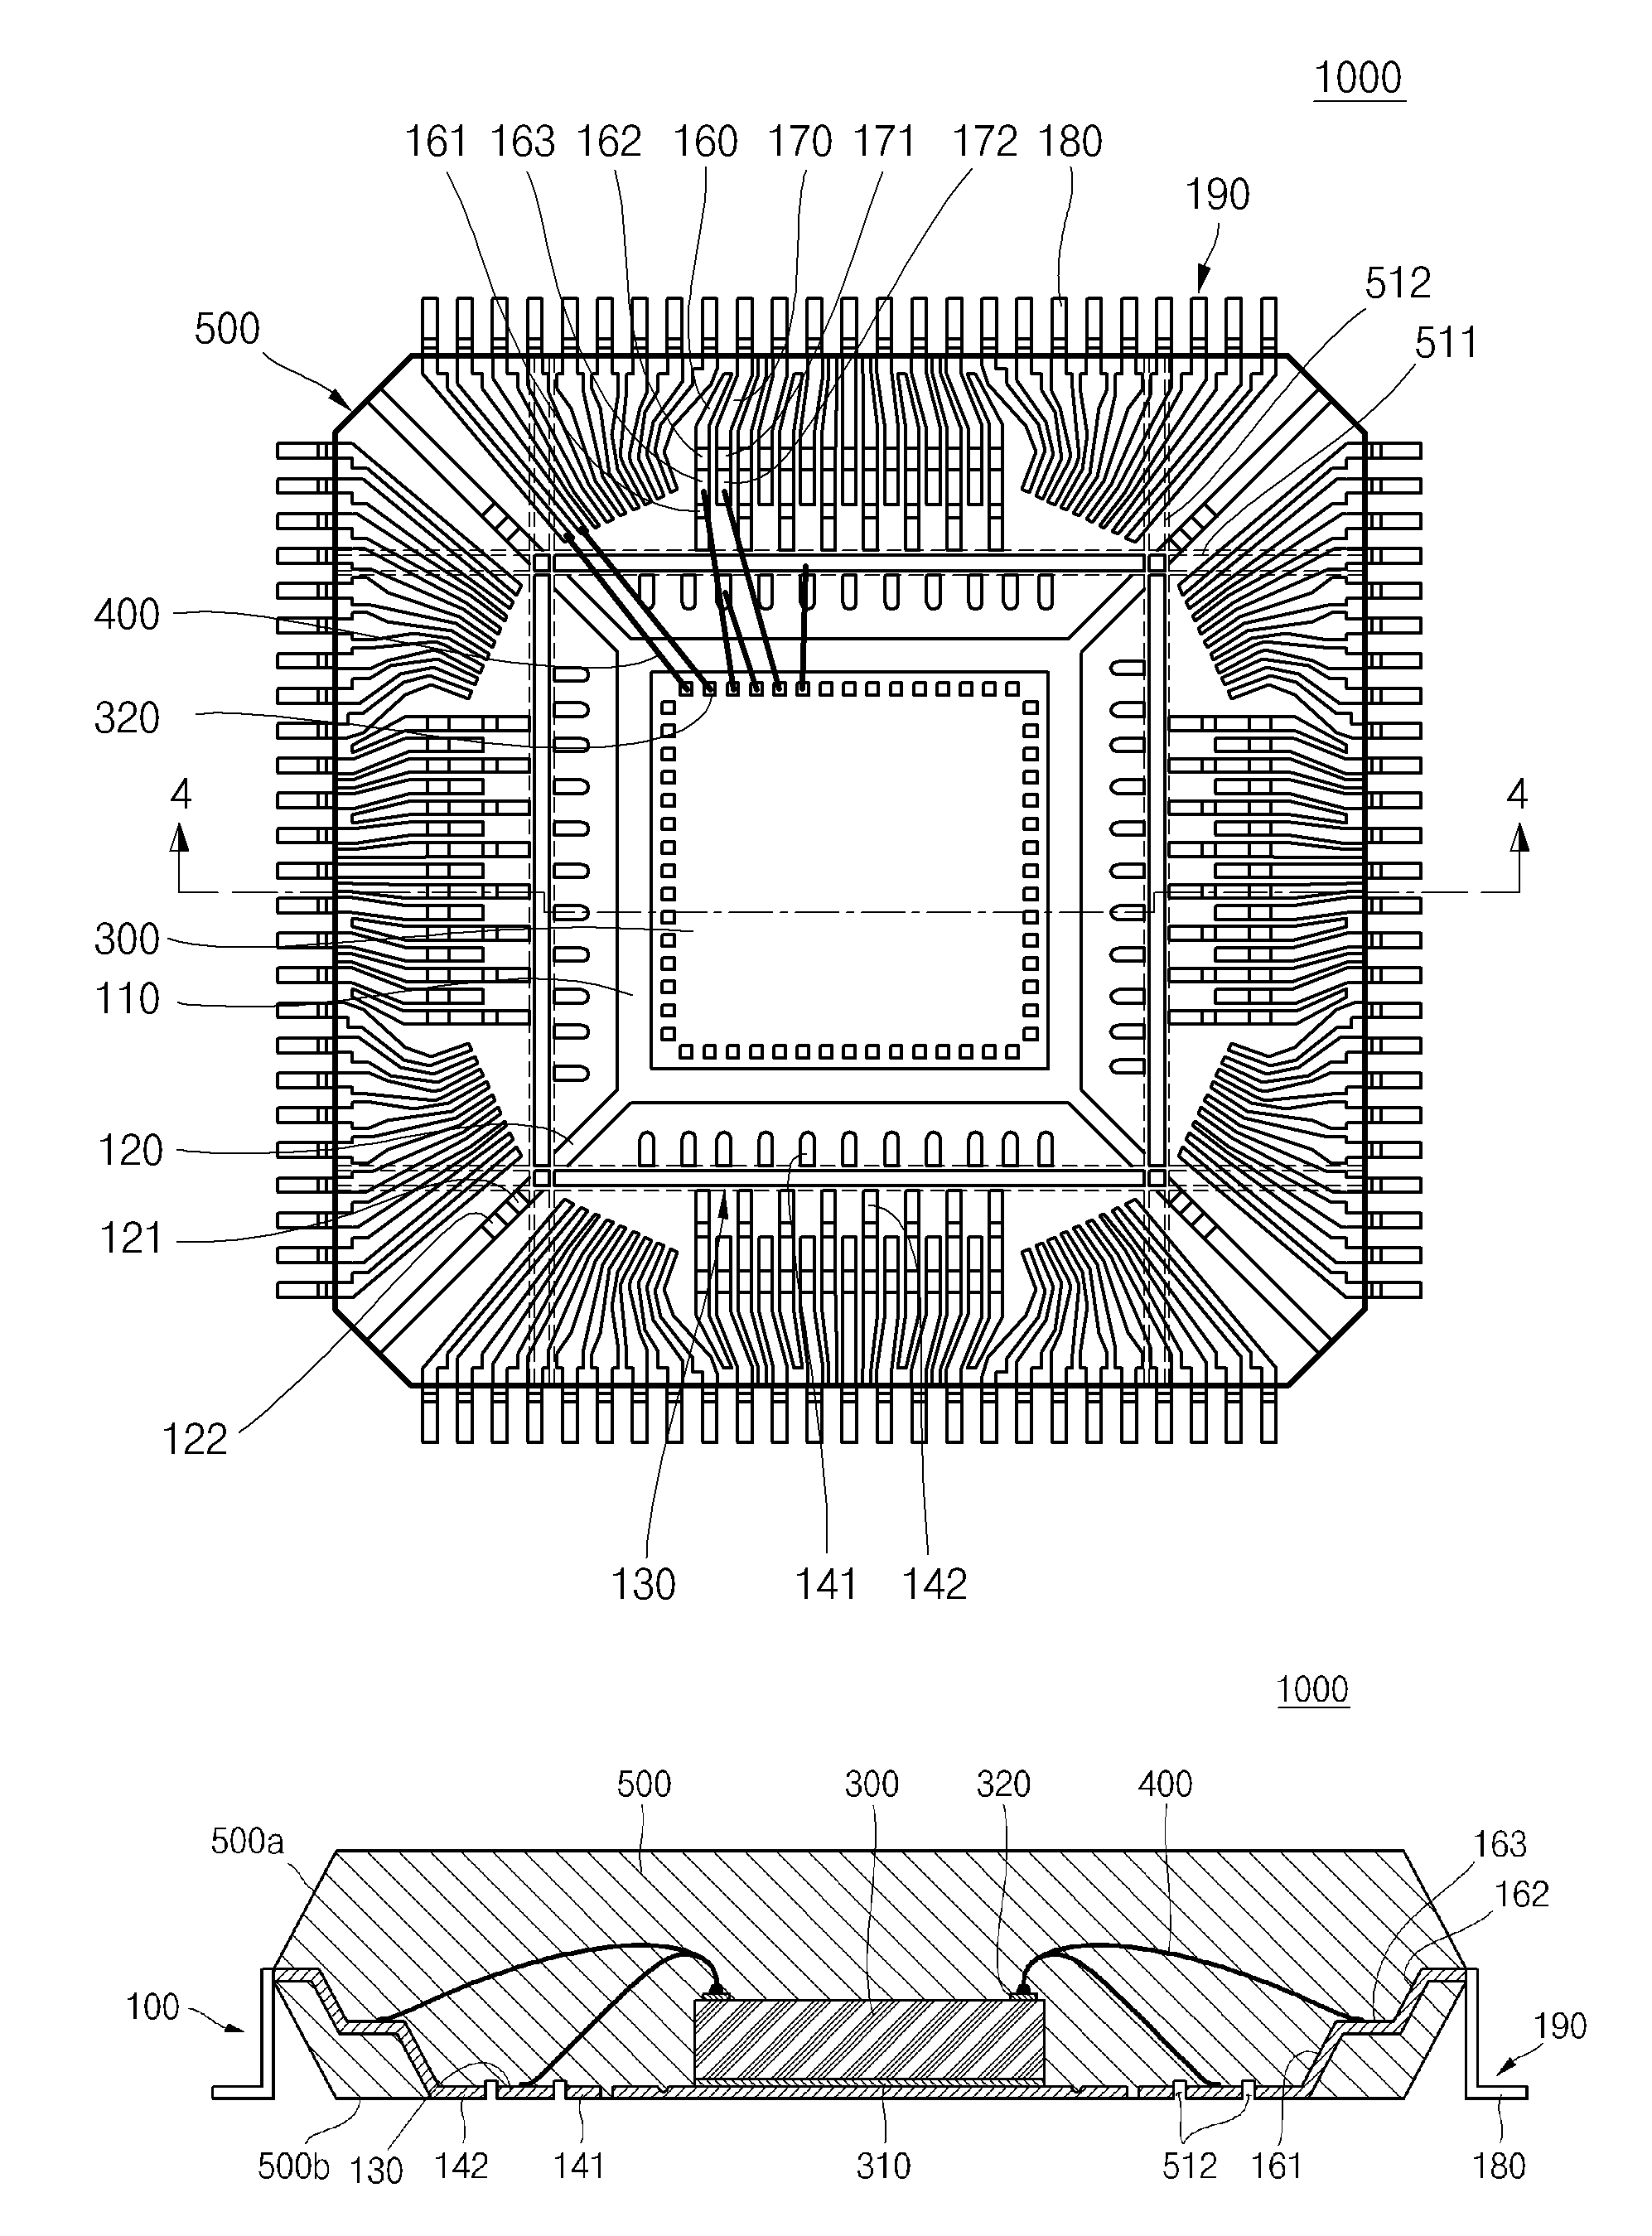 Semiconductor device with increased I/O leadframe including power bars